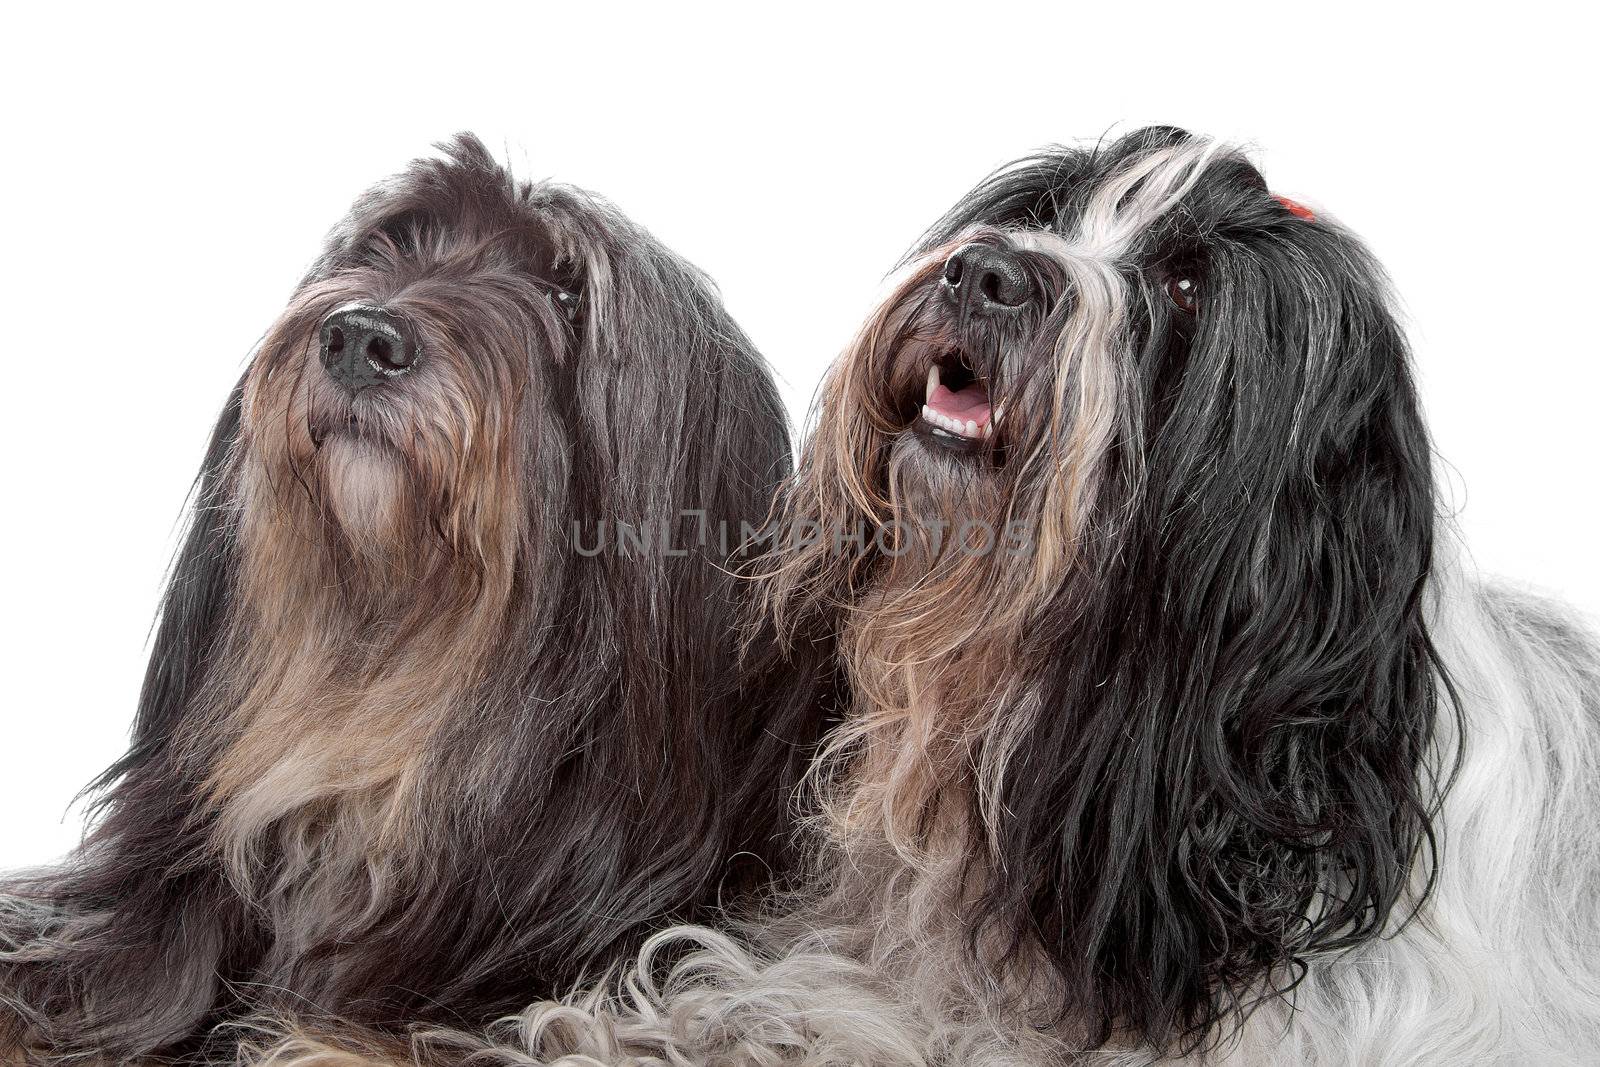 two Tibetan Terrier dogs by eriklam